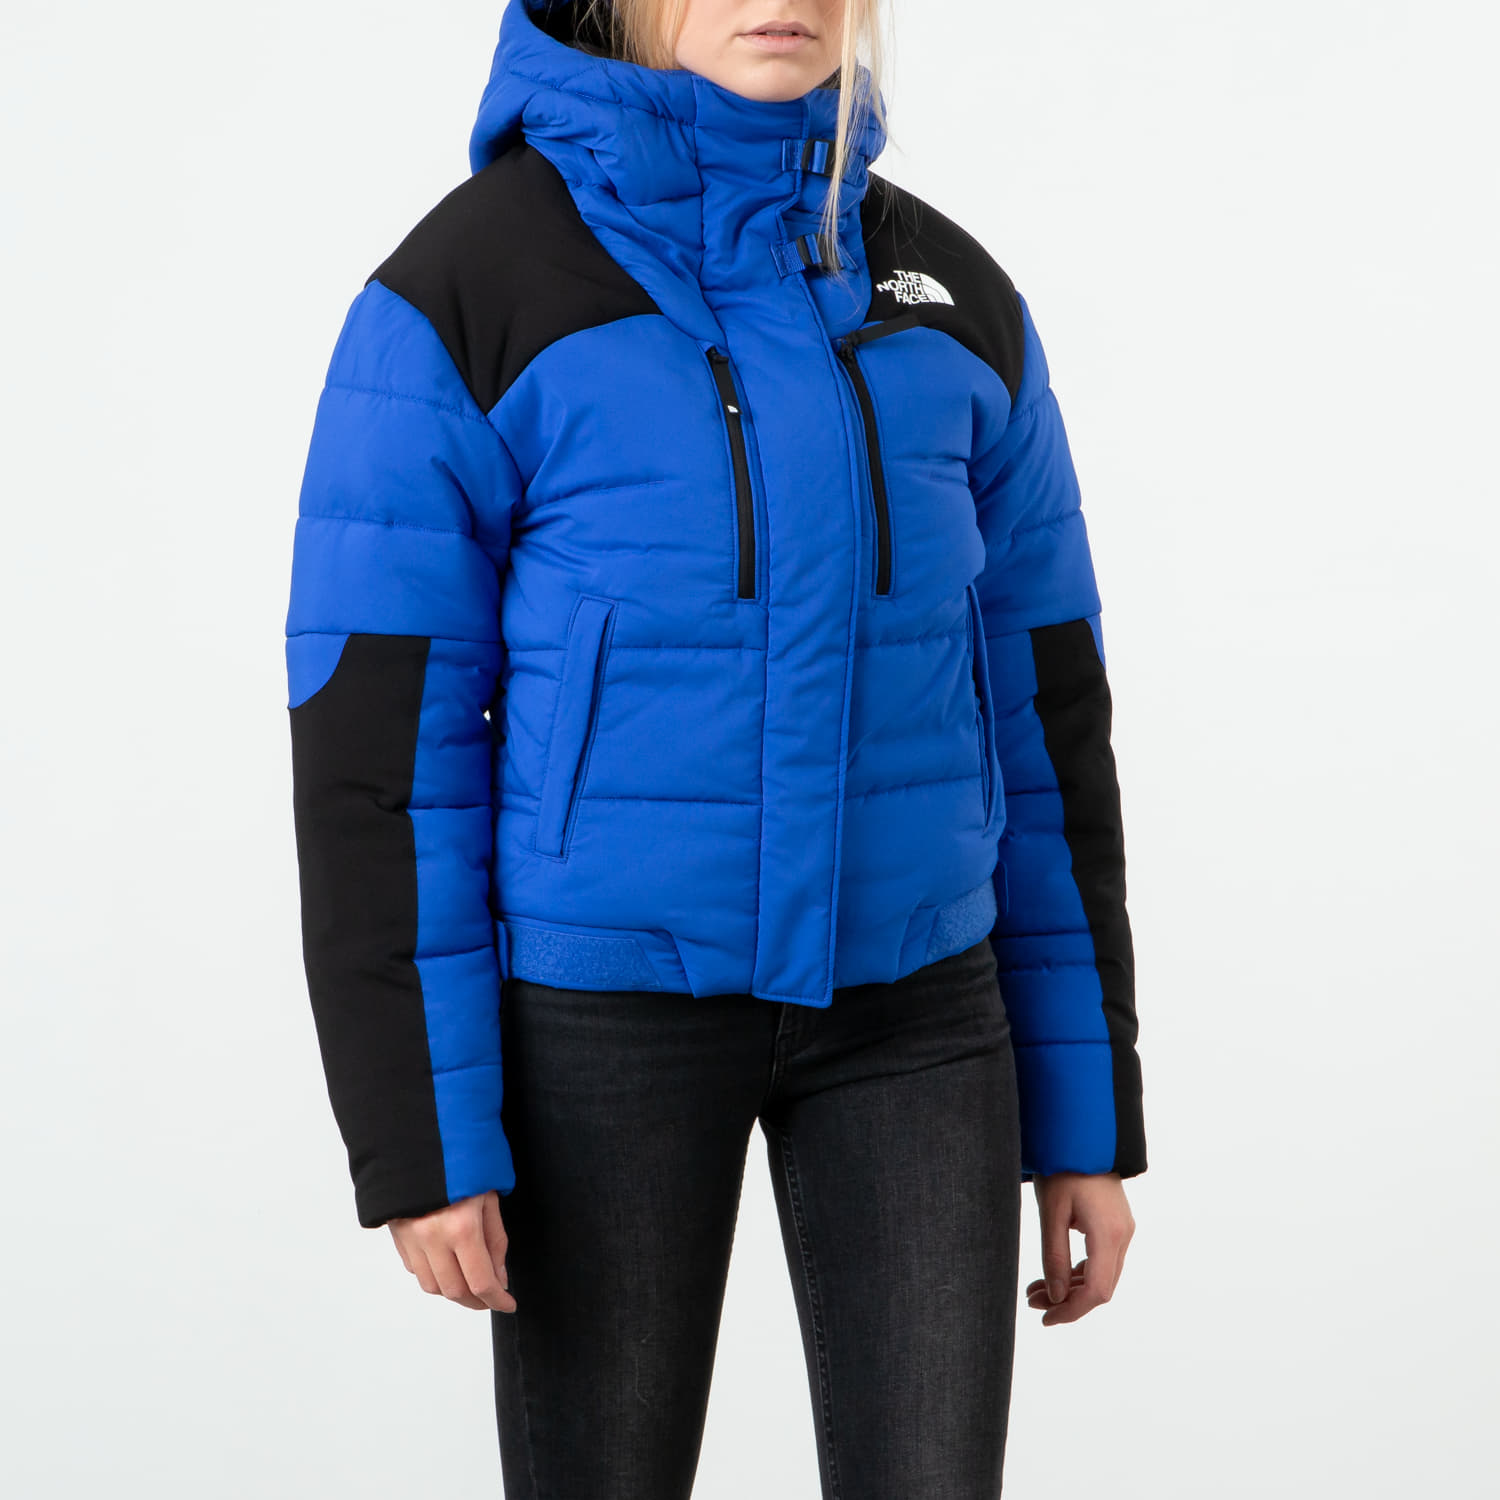 Himalayan puffer jacket - The North Face - Women